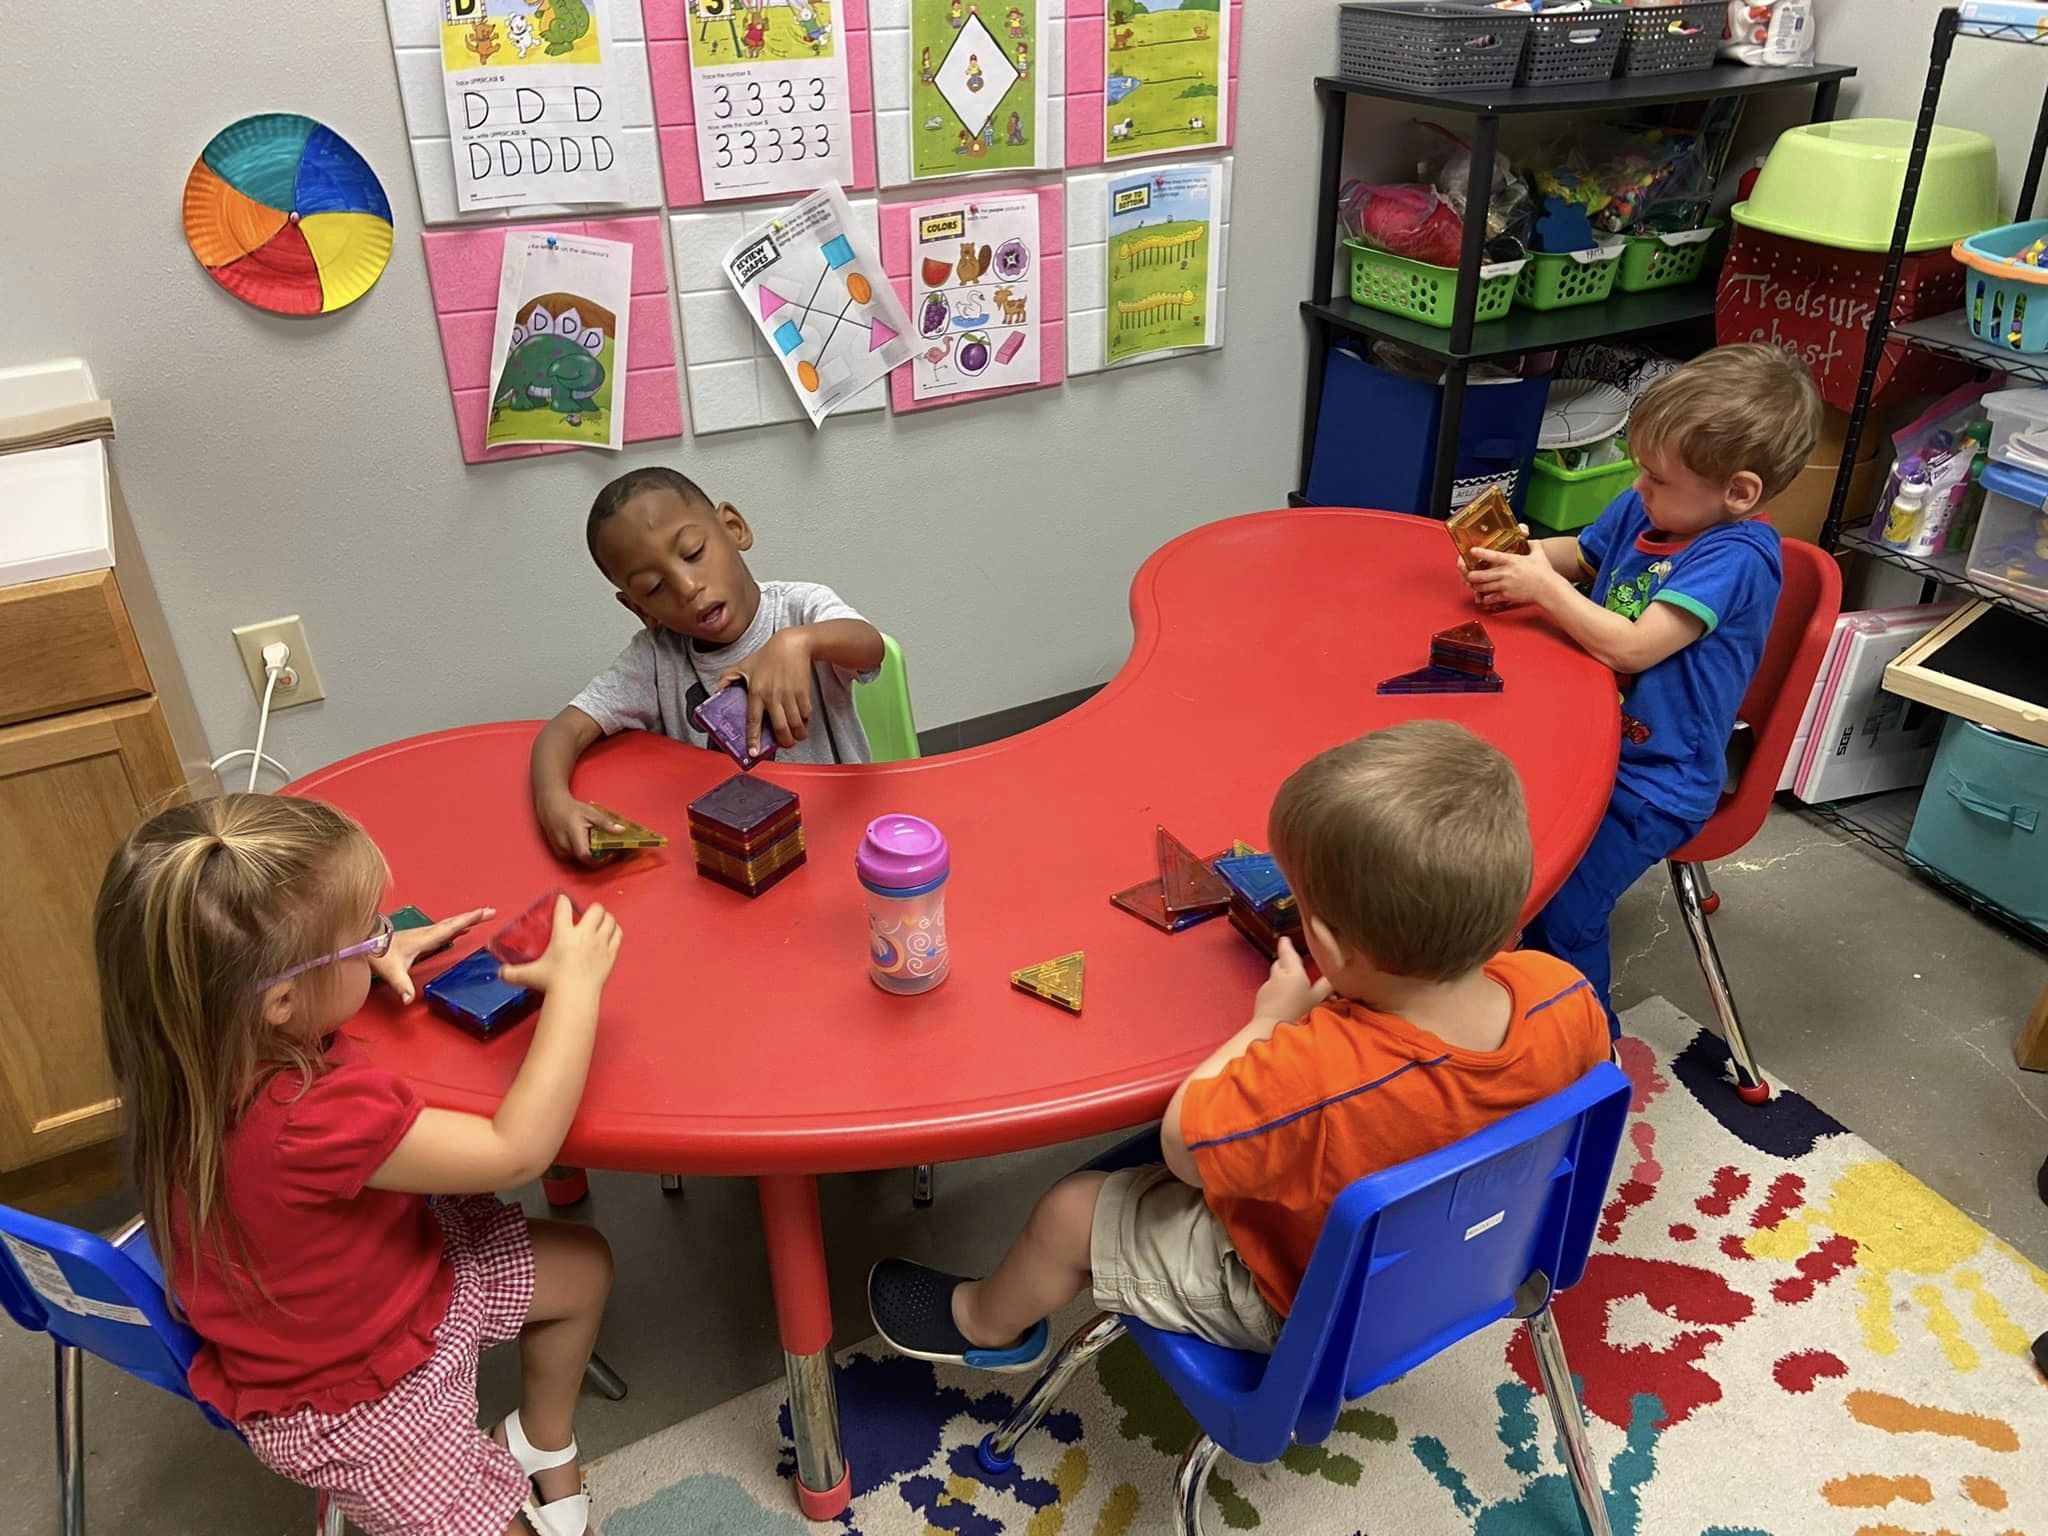 Child care for disabled children provides daily fun and socialization